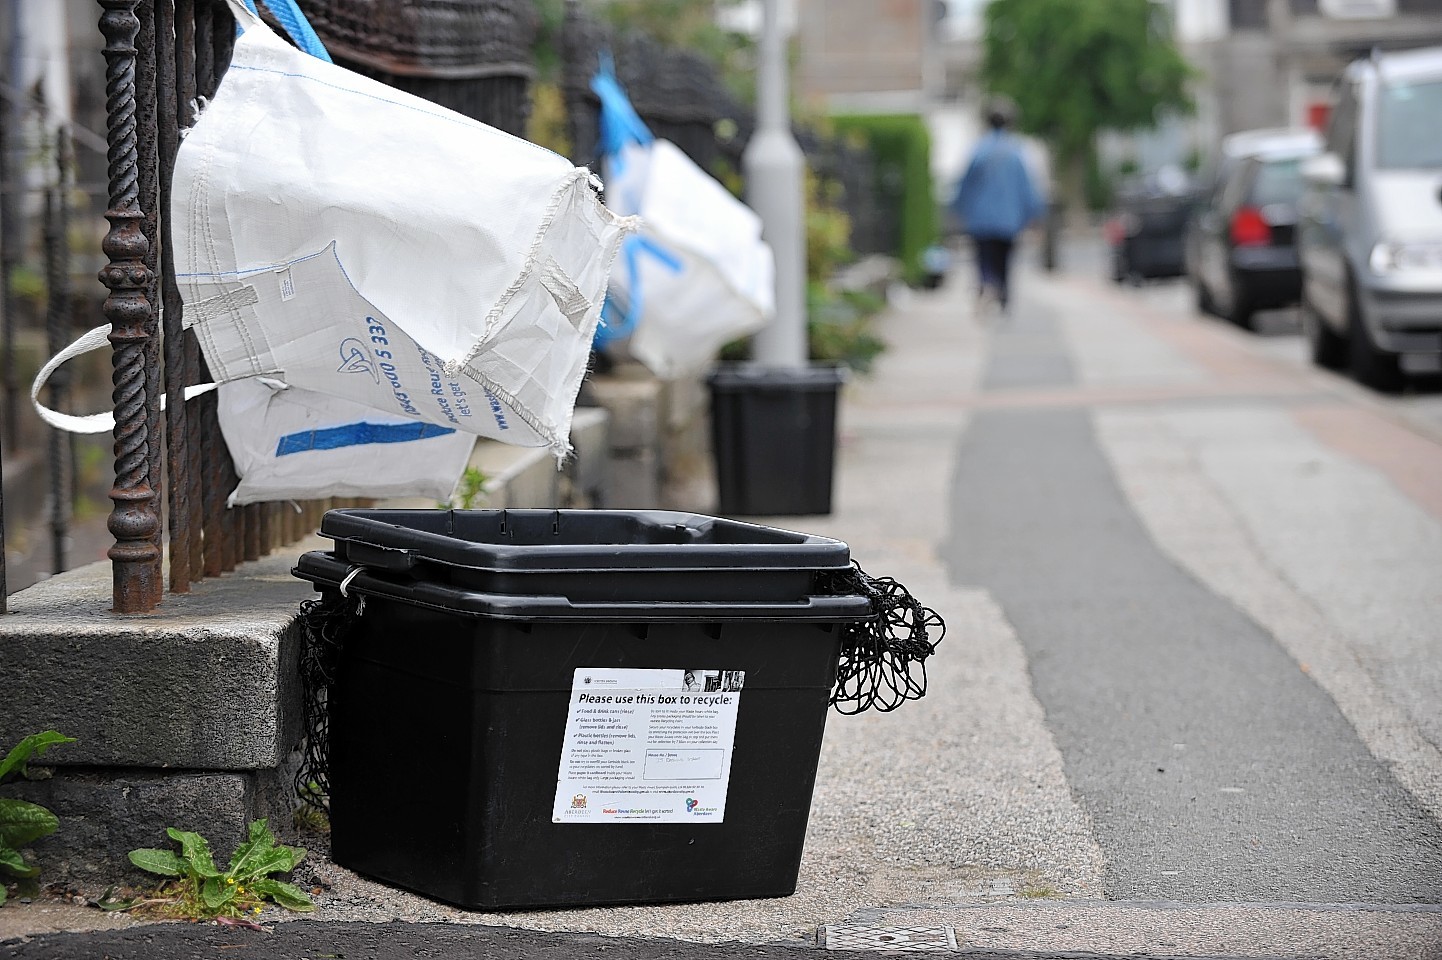 Bag and box recycling is currently in use in Aberdeen